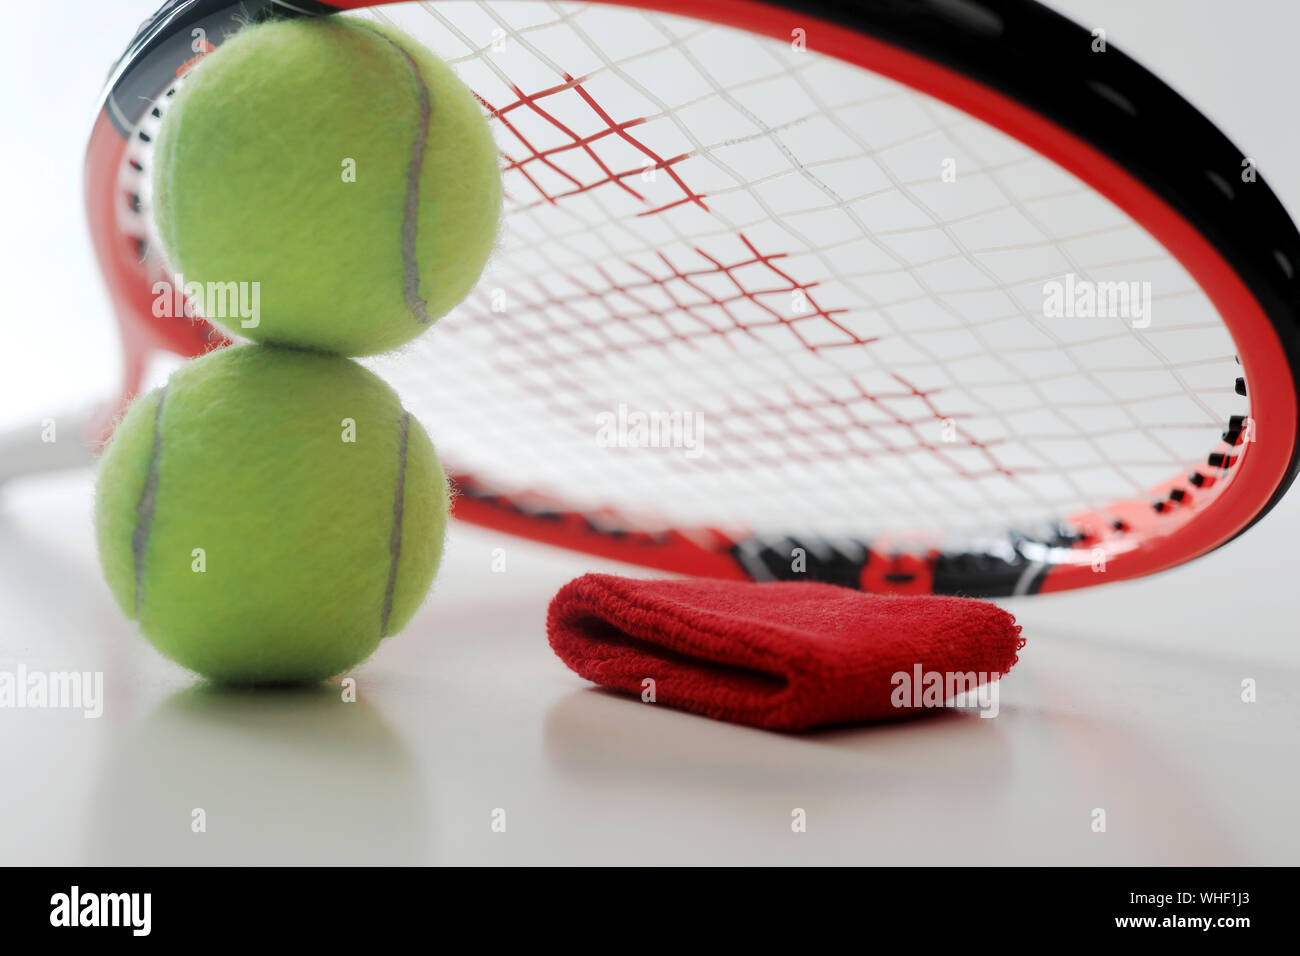 Close-up Of Tennis Ball And Racket With Armband On White Background Stock Photo